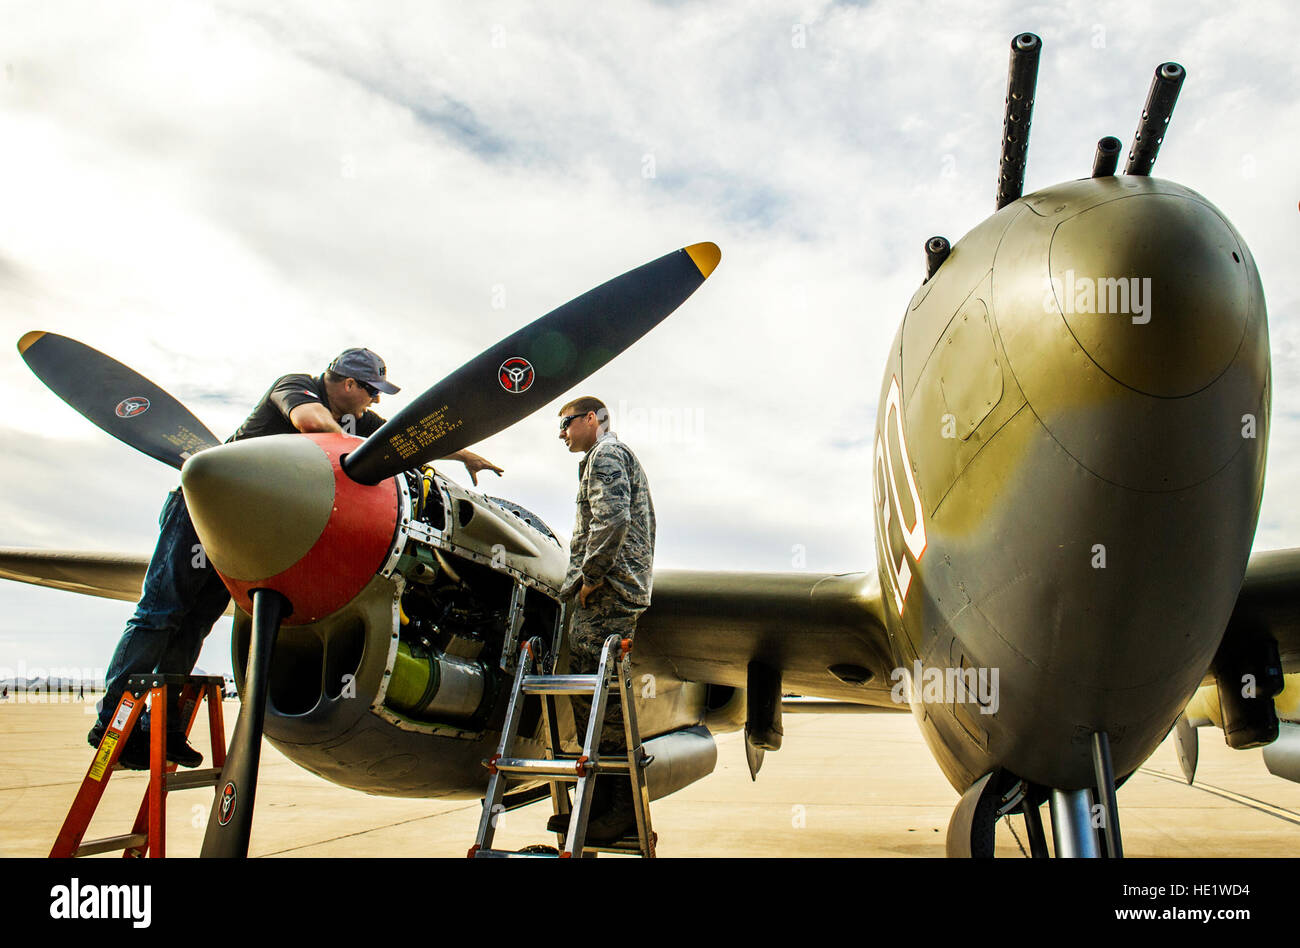 Senior Airman Anthony Naugle, right, an A-10 crew chief with the 357th Fighter Squadron, 355th Fighter Group based at Davis-Monthan AFB, Tucson, Ariz., gets a lesson in the maintenance of one of the two 1,000 hp 746 kW, turbo-supercharged, 12-cylinder Allison V-1710 engines on a P-38 &quot;Lightning&quot; from Doug Abshier after the day's practice flights at the Heritage Flight Training Course, Mar 5, 2016.  J.M. Eddins Jr. Stock Photo